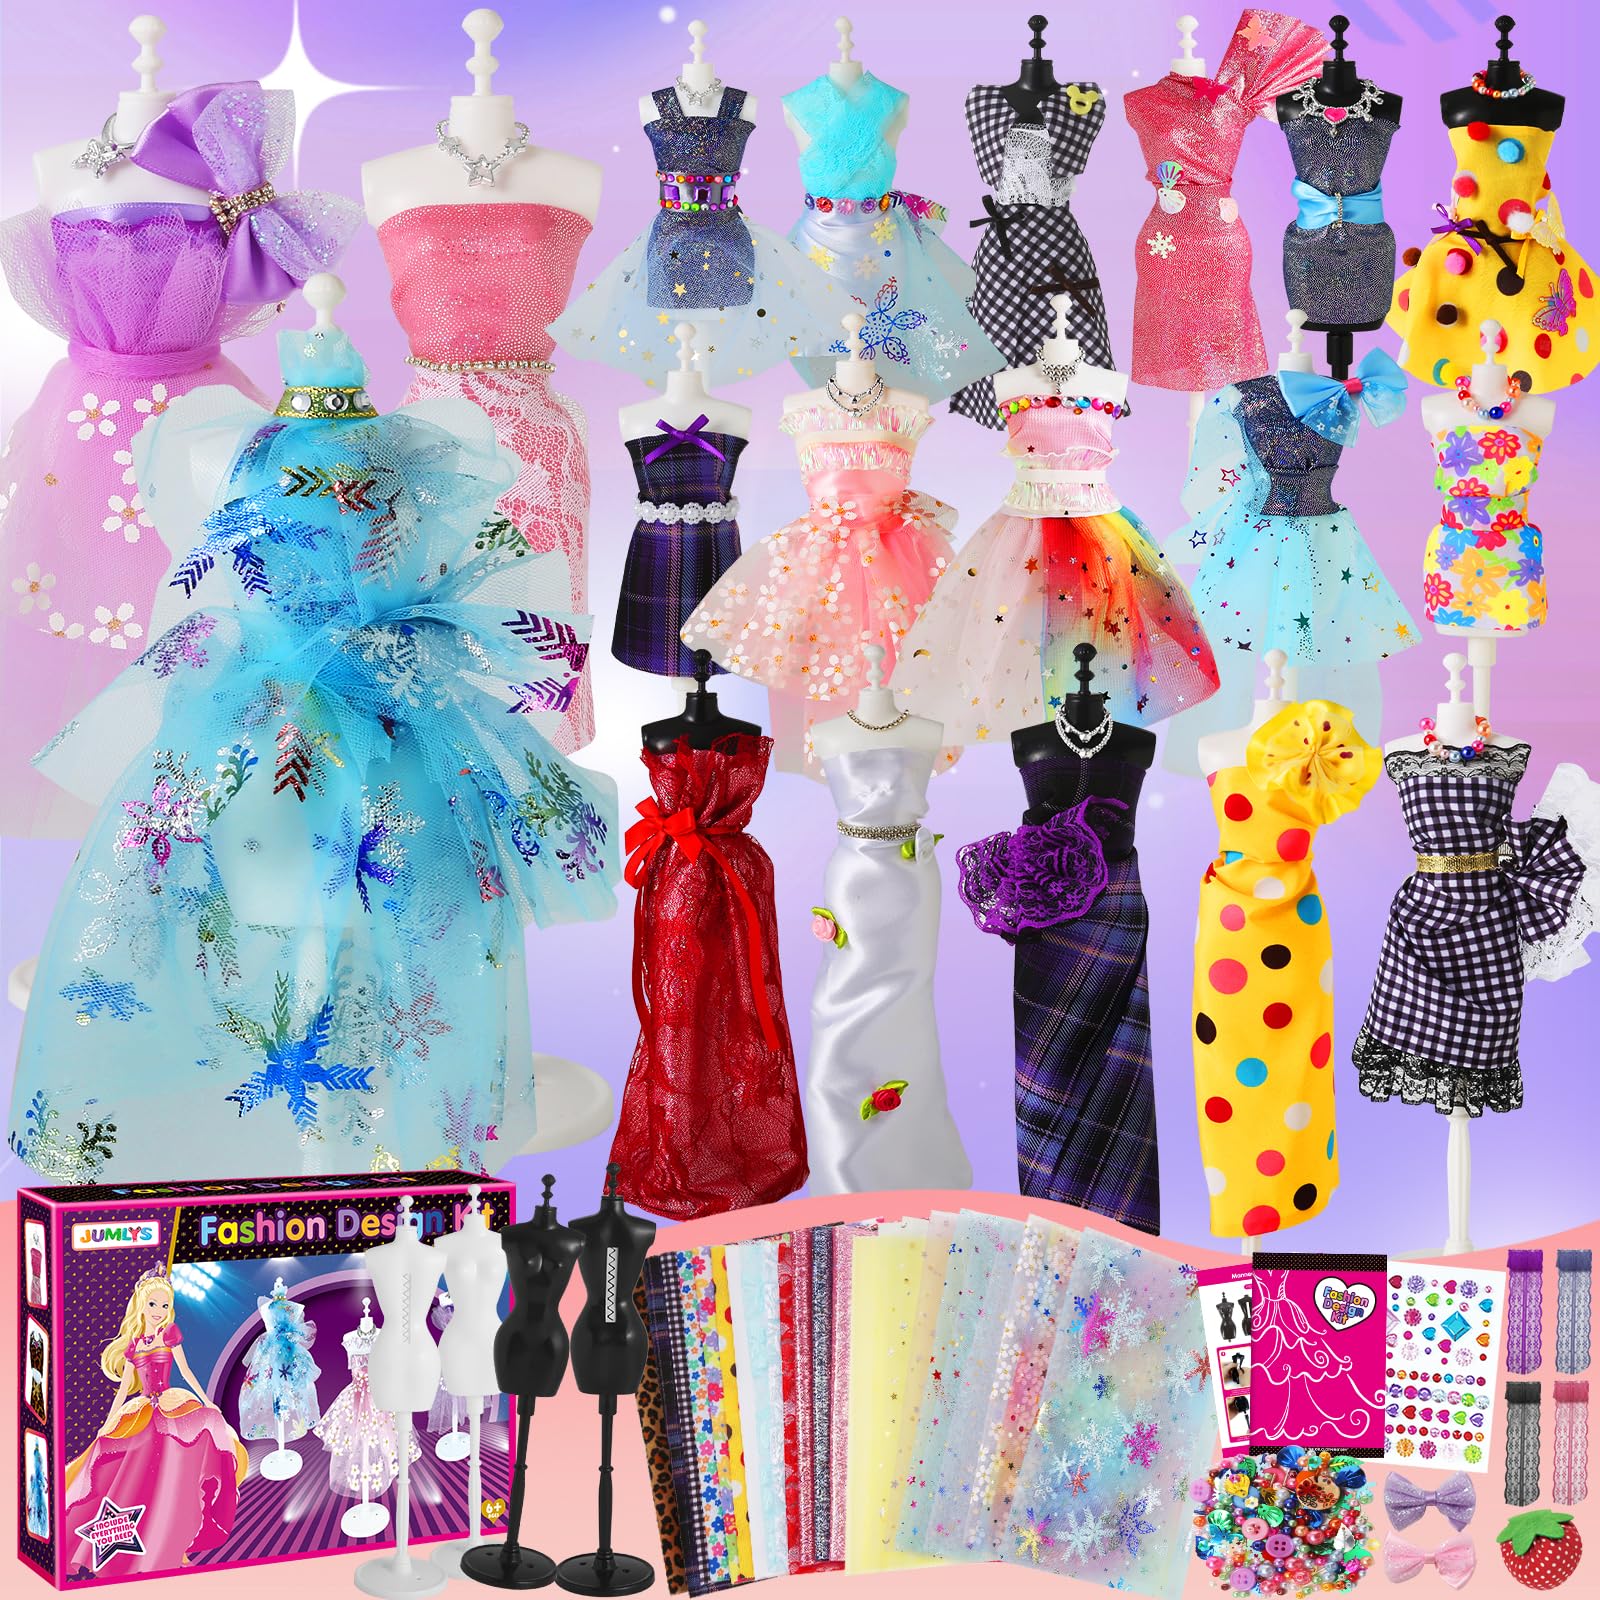 Jumlys 600+PCS Fashion Designer Kits for Girls Ages 6, 7, 8, 9, 10, 11, 12,  Sewing Kits with 4 Mannequins for Kids Ages 6-8, 8-12, DIY Arts and Crafts